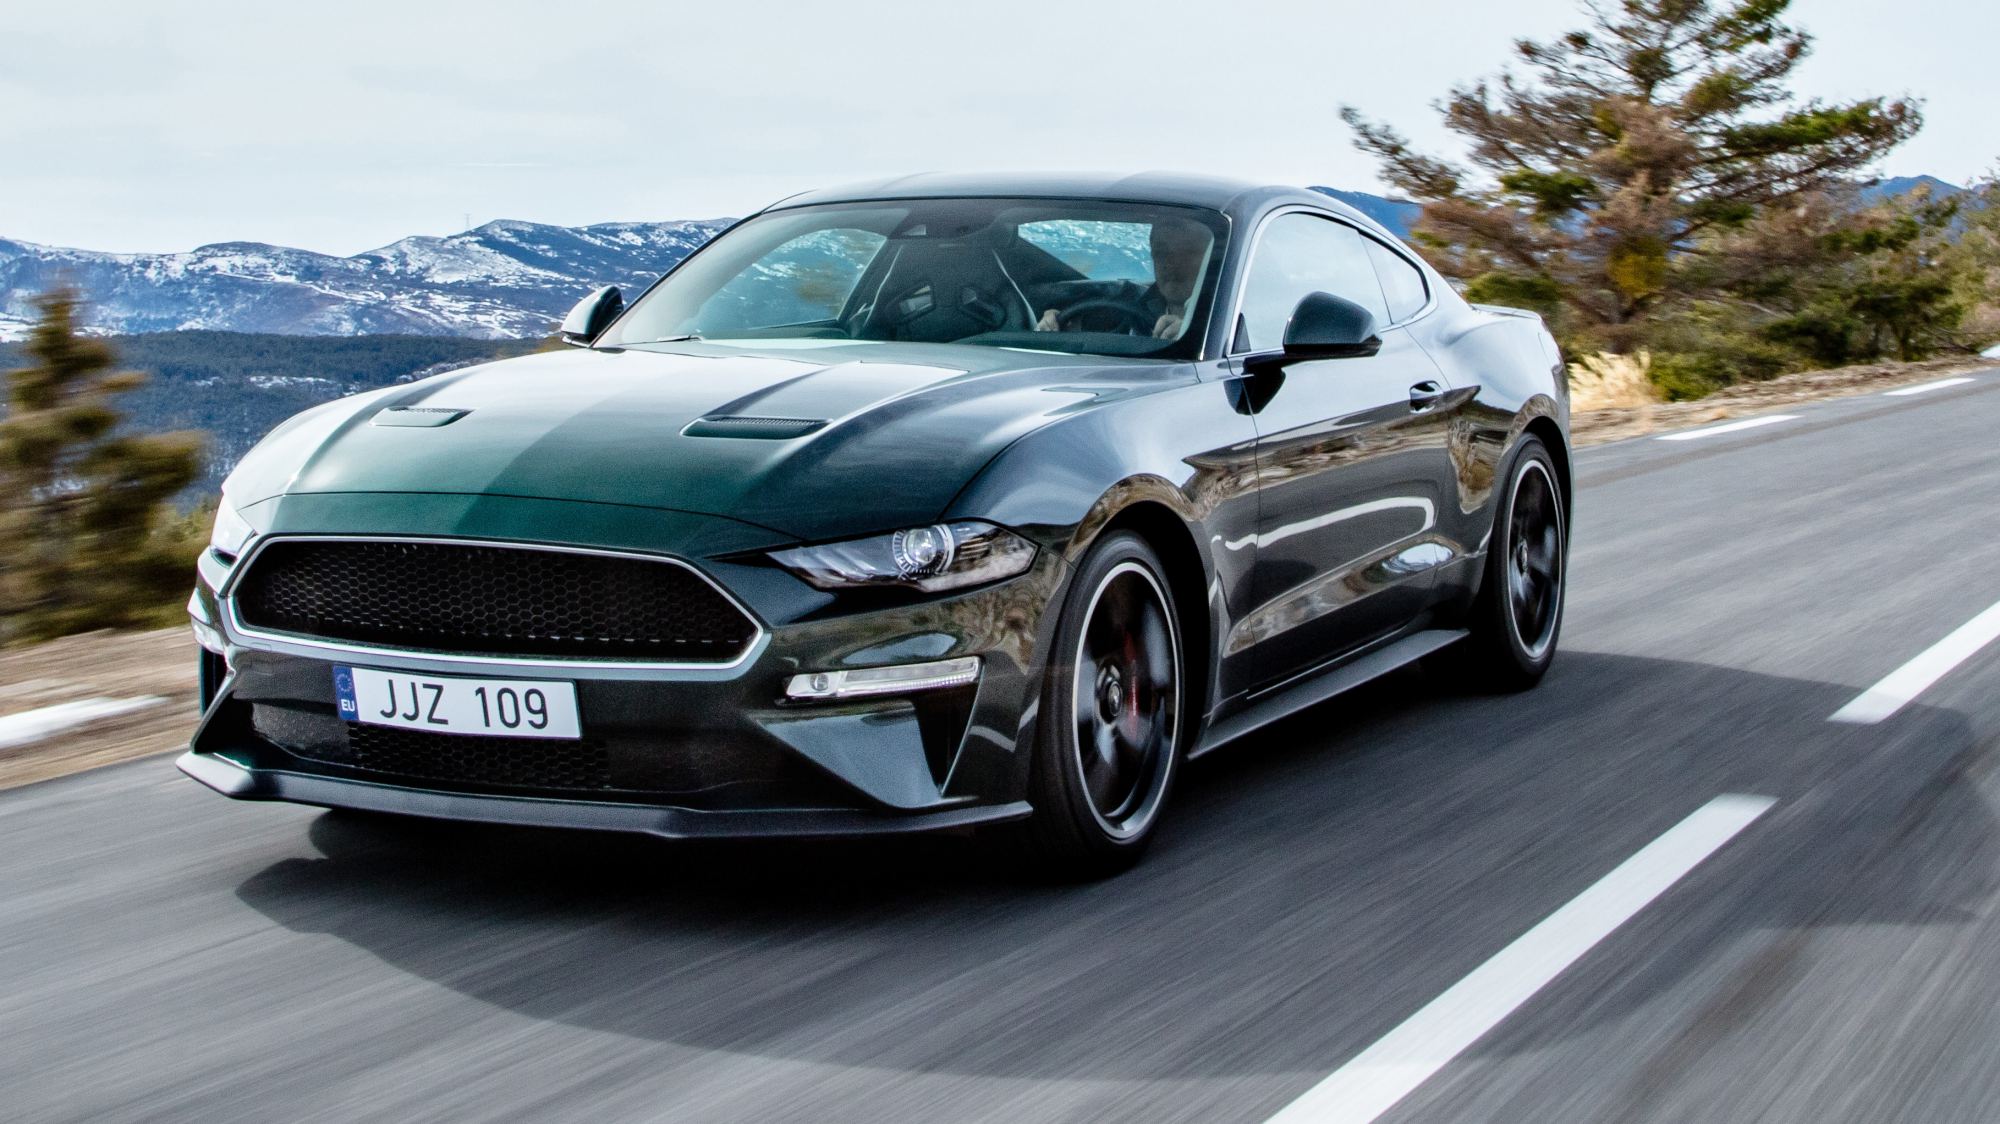 News Mustang Bullitt Confirmed For Oz, ‘Strictly Limited